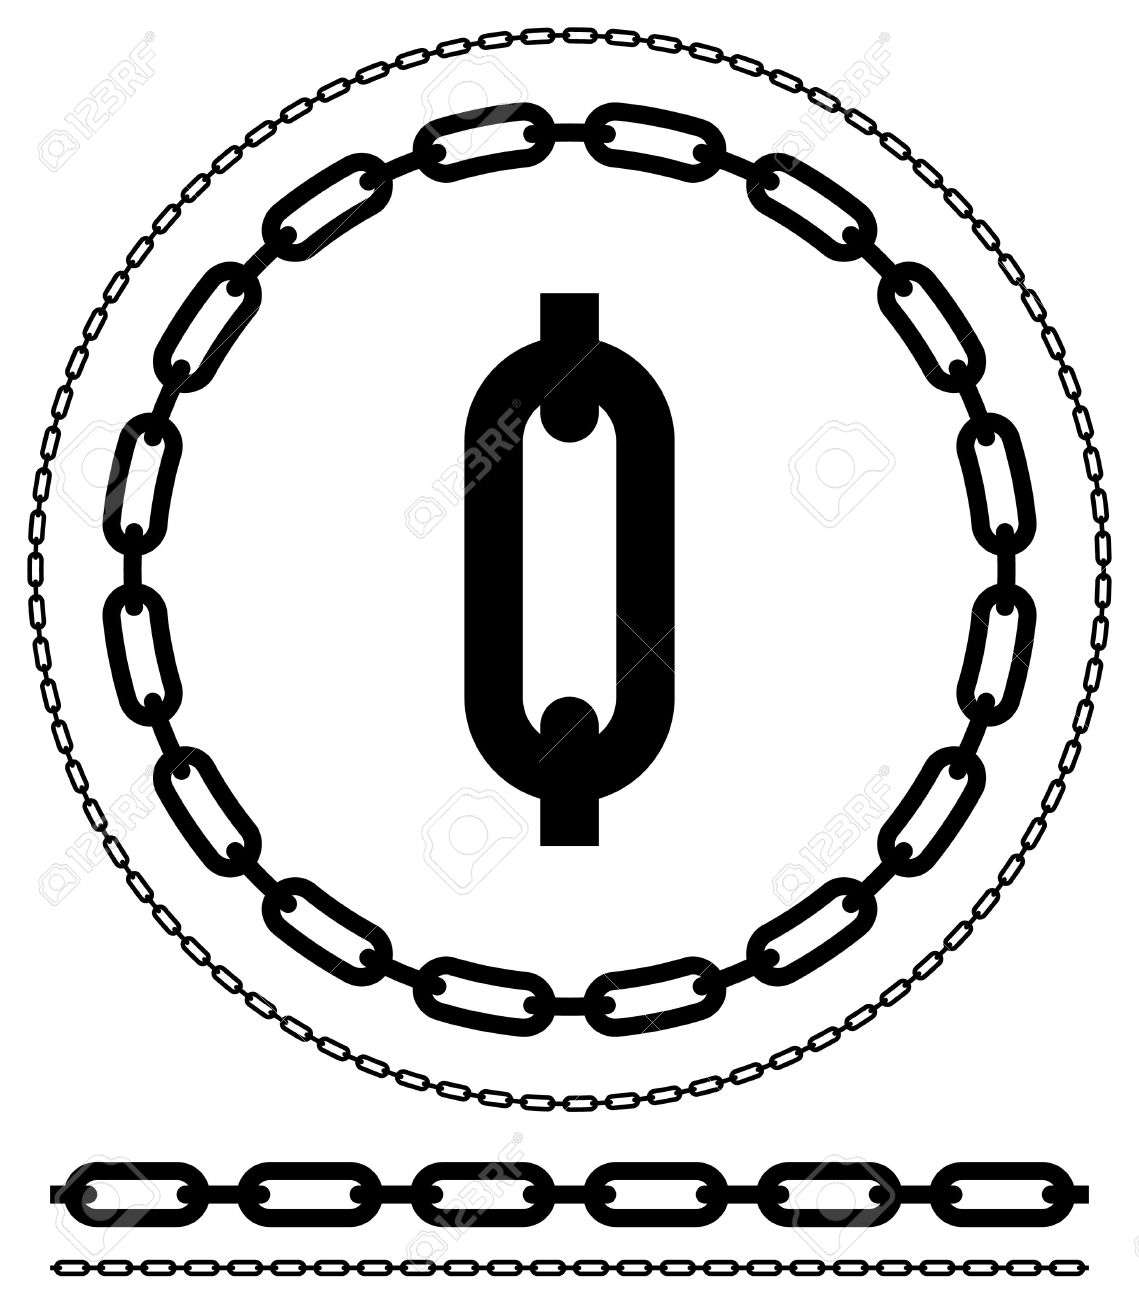 chain link clipart � Clipart Free Download 